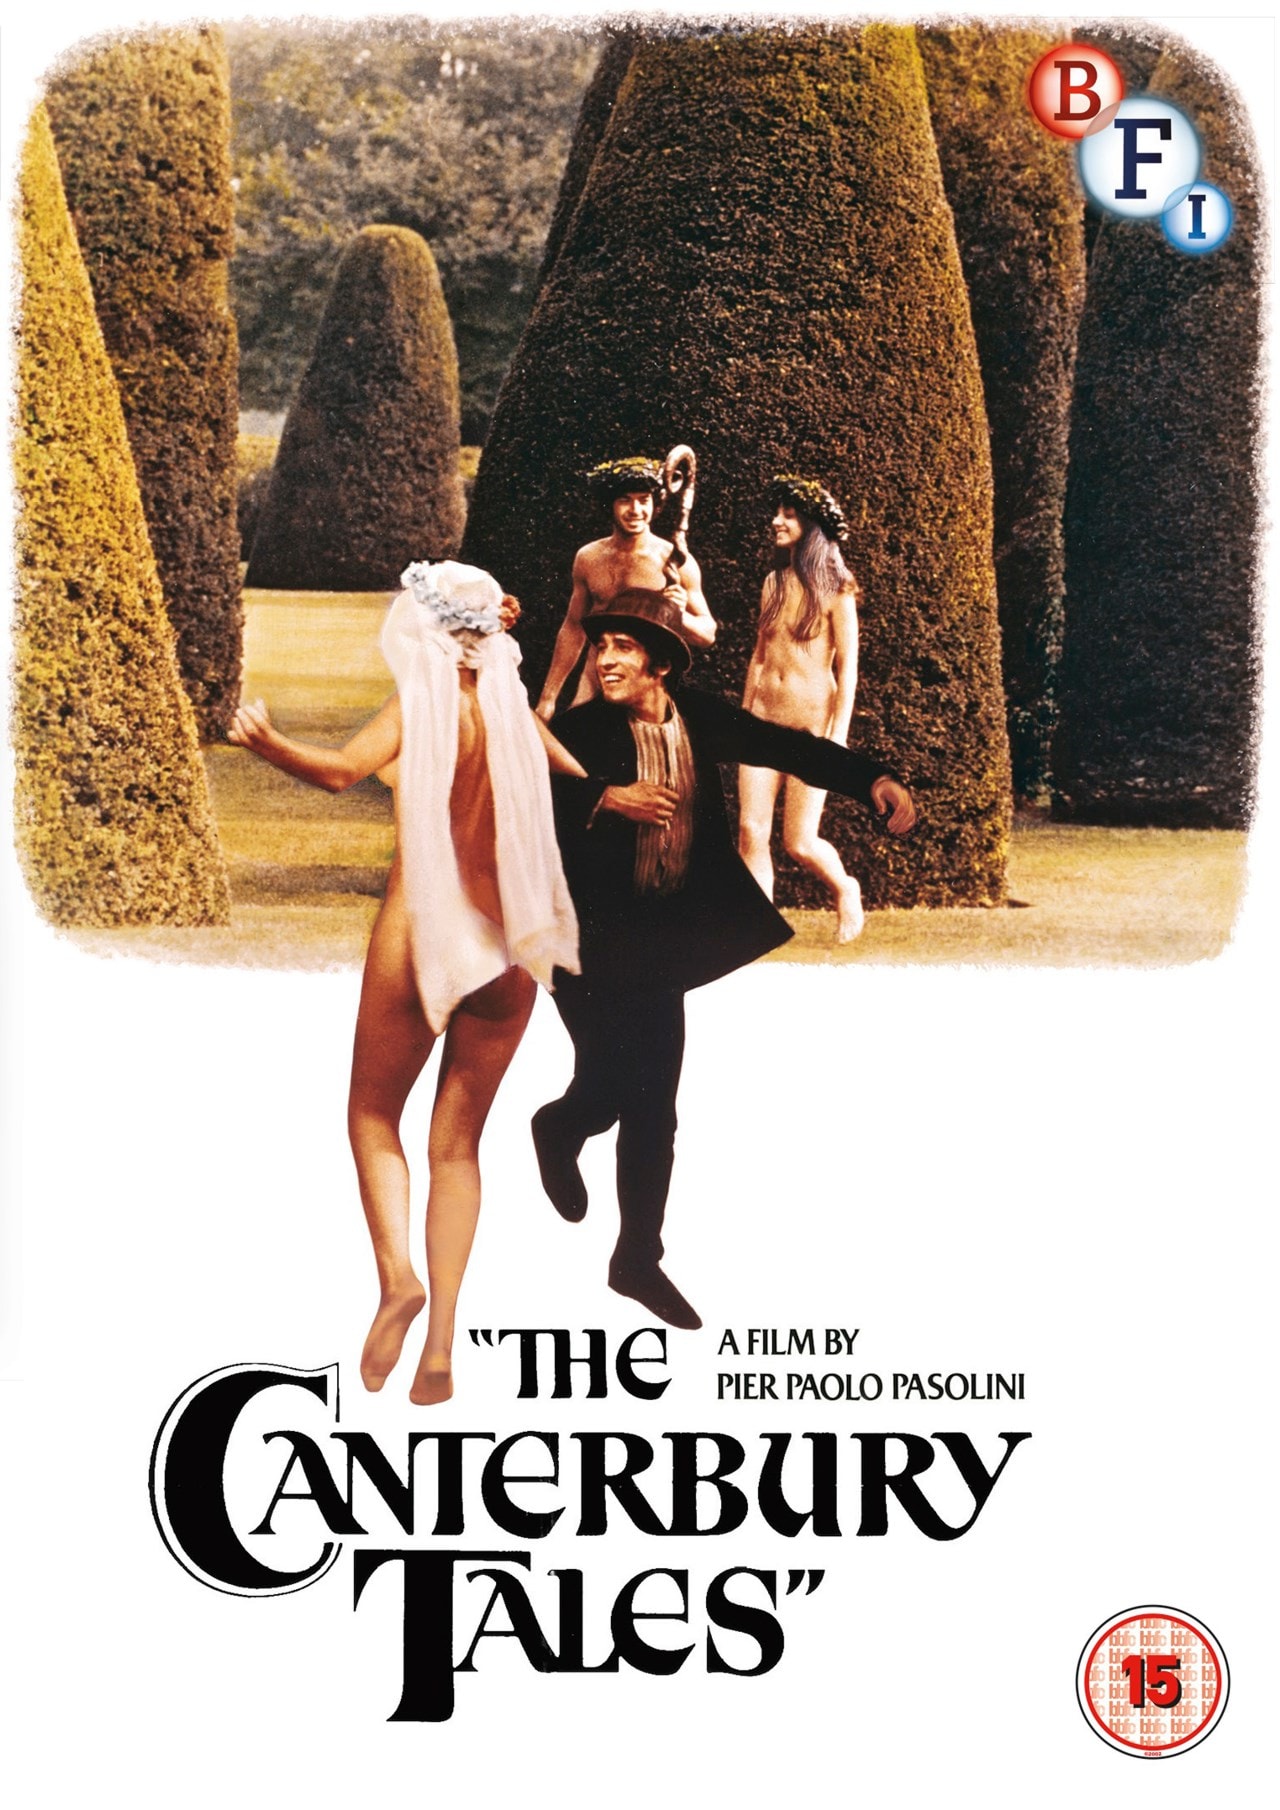 The Canterbury Tales DVD Free Shipping Over 20 HMV Store